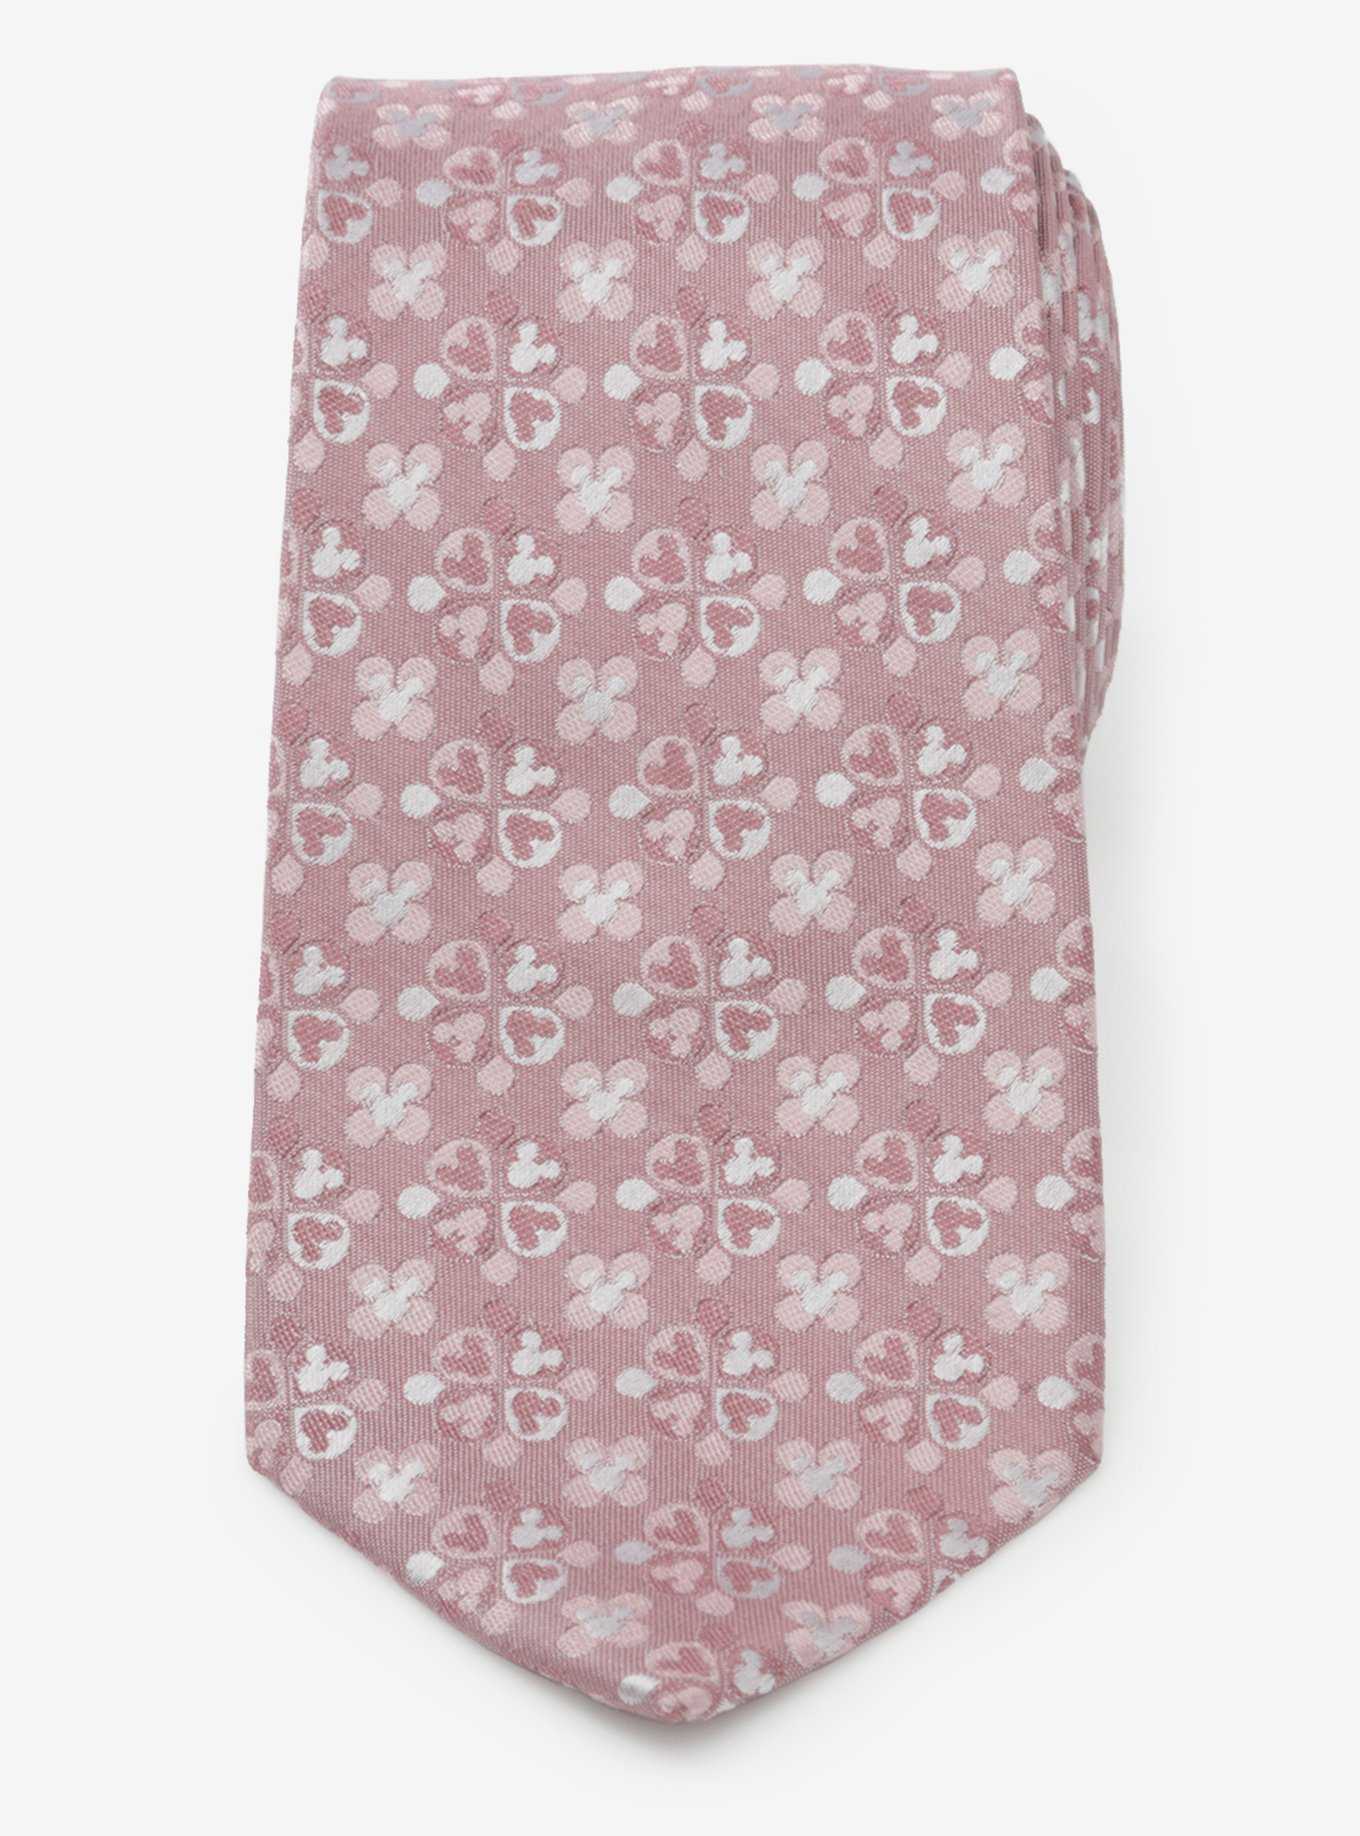 Disney Mickey Mouse Silhouette Blossom Pink Tie, , hi-res